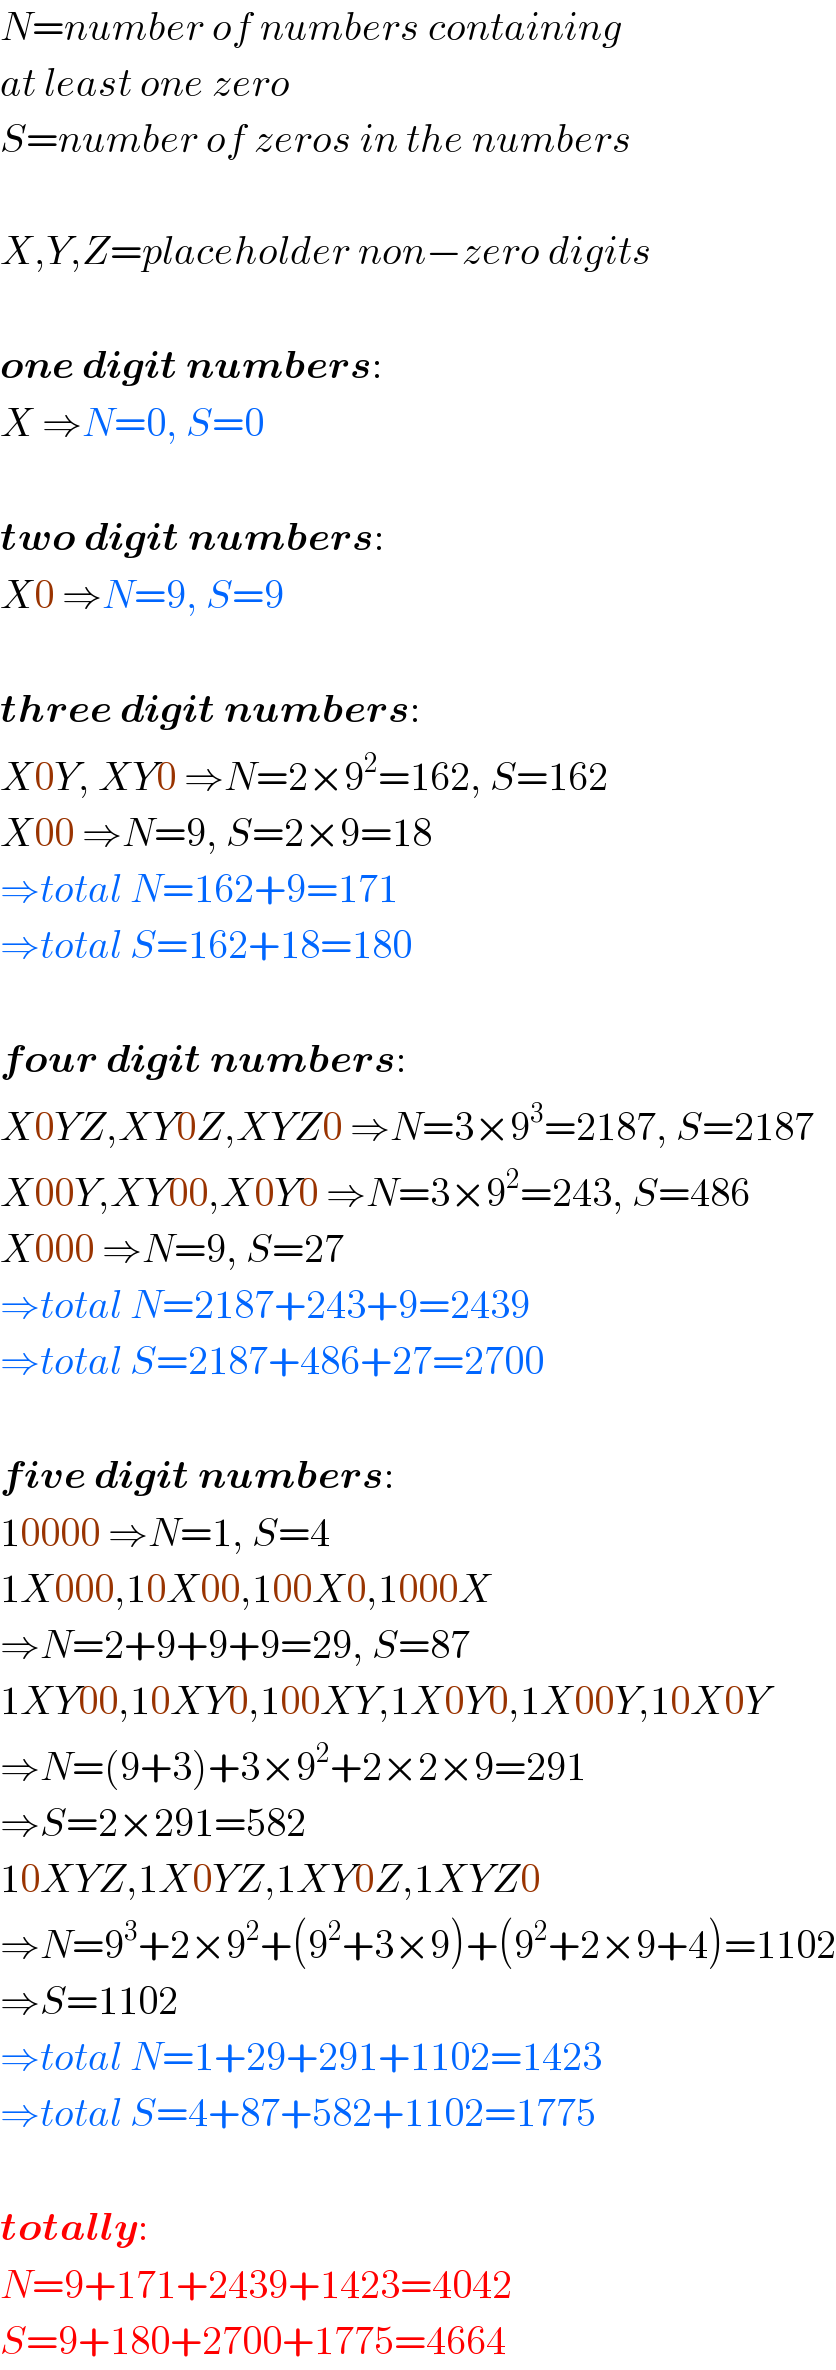 N=number of numbers containing  at least one zero  S=number of zeros in the numbers    X,Y,Z=placeholder non−zero digits    one digit numbers:  X ⇒N=0, S=0    two digit numbers:  X0 ⇒N=9, S=9    three digit numbers:  X0Y, XY0 ⇒N=2×9^2 =162, S=162  X00 ⇒N=9, S=2×9=18  ⇒total N=162+9=171  ⇒total S=162+18=180    four digit numbers:  X0YZ,XY0Z,XYZ0 ⇒N=3×9^3 =2187, S=2187  X00Y,XY00,X0Y0 ⇒N=3×9^2 =243, S=486  X000 ⇒N=9, S=27  ⇒total N=2187+243+9=2439  ⇒total S=2187+486+27=2700    five digit numbers:  10000 ⇒N=1, S=4  1X000,10X00,100X0,1000X  ⇒N=2+9+9+9=29, S=87  1XY00,10XY0,100XY,1X0Y0,1X00Y,10X0Y  ⇒N=(9+3)+3×9^2 +2×2×9=291  ⇒S=2×291=582  10XYZ,1X0YZ,1XY0Z,1XYZ0  ⇒N=9^3 +2×9^2 +(9^2 +3×9)+(9^2 +2×9+4)=1102  ⇒S=1102  ⇒total N=1+29+291+1102=1423  ⇒total S=4+87+582+1102=1775    totally:  N=9+171+2439+1423=4042  S=9+180+2700+1775=4664  